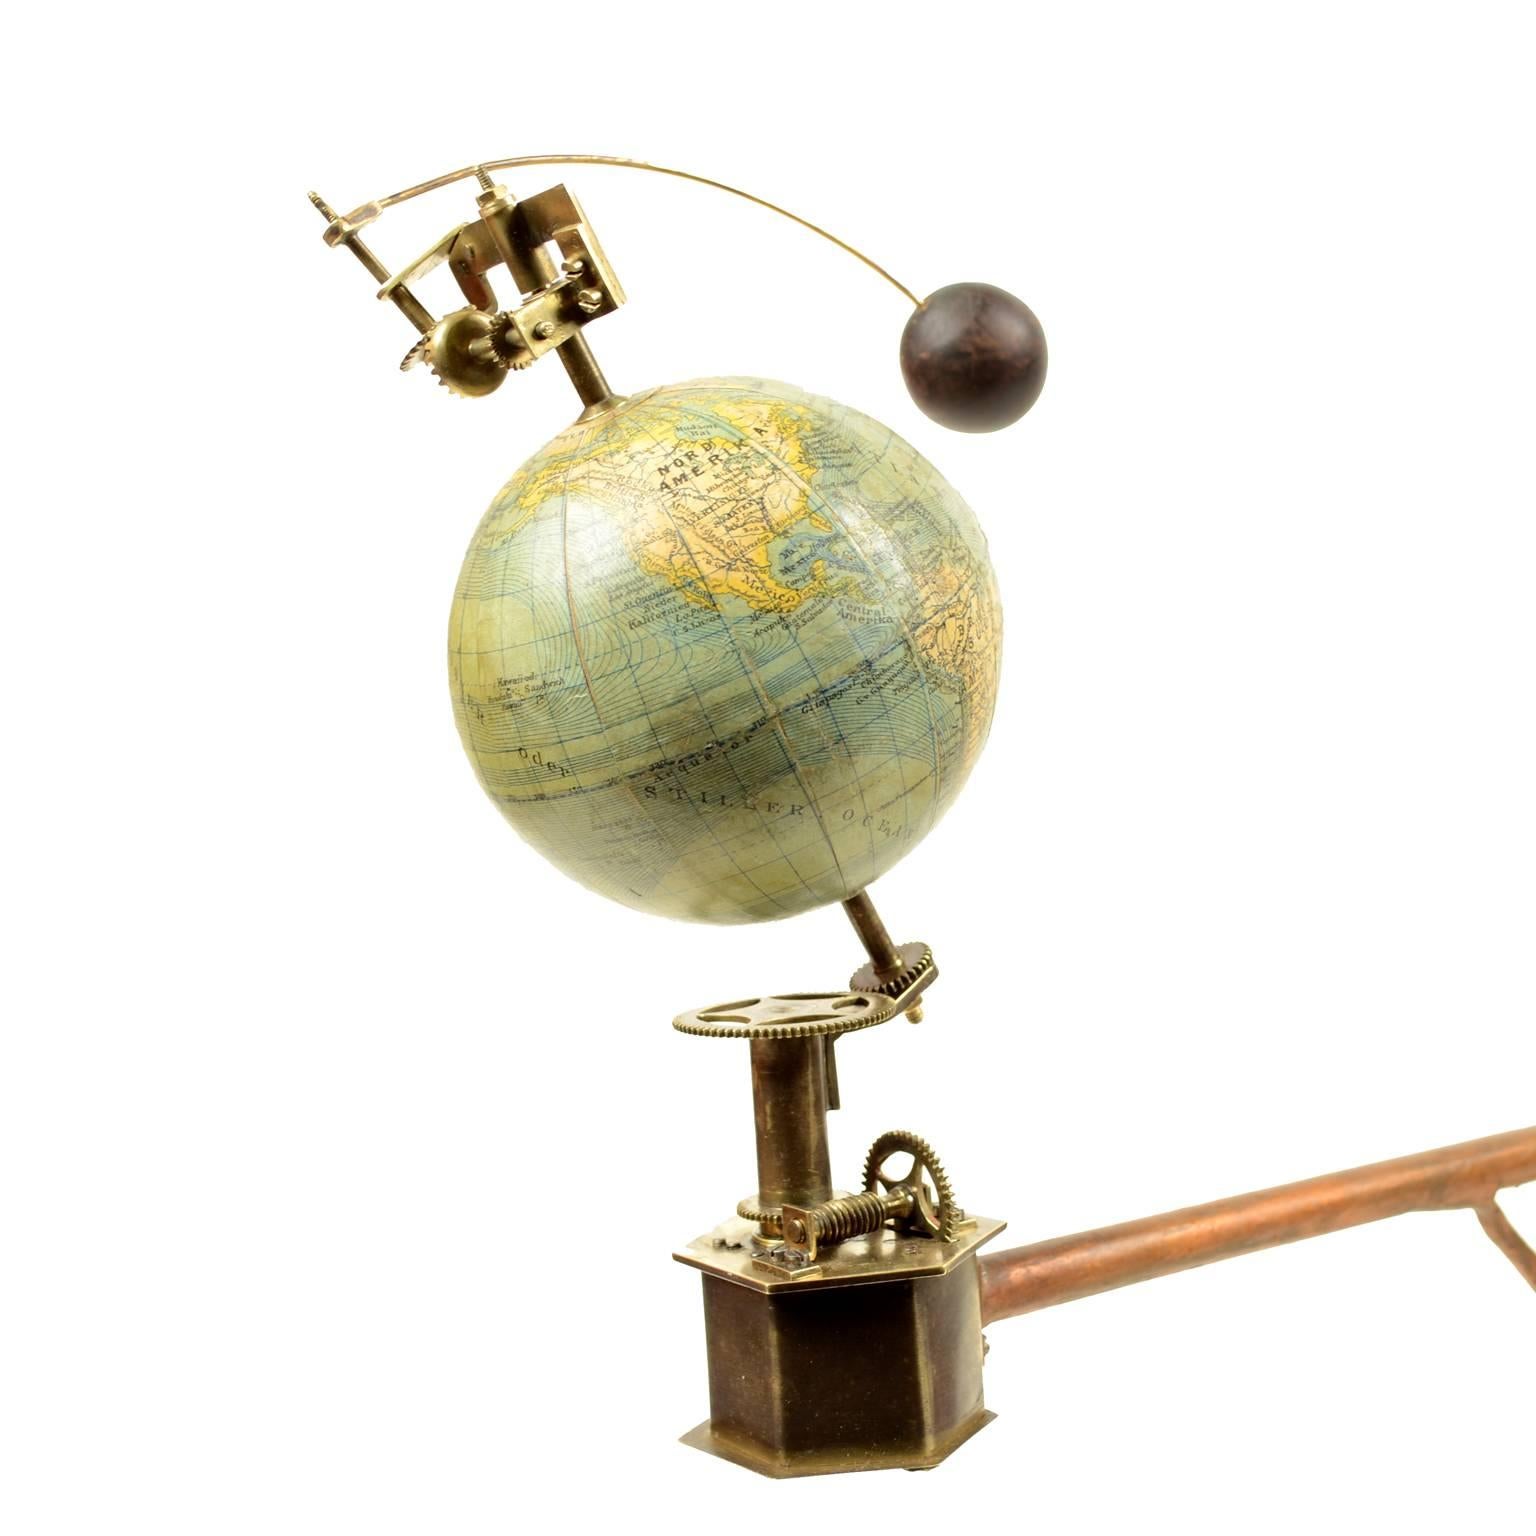 Mid-19th Century Antique Brass Czech Orrery Astronomical Instruments Made by Jan Felkl in 1870 For Sale